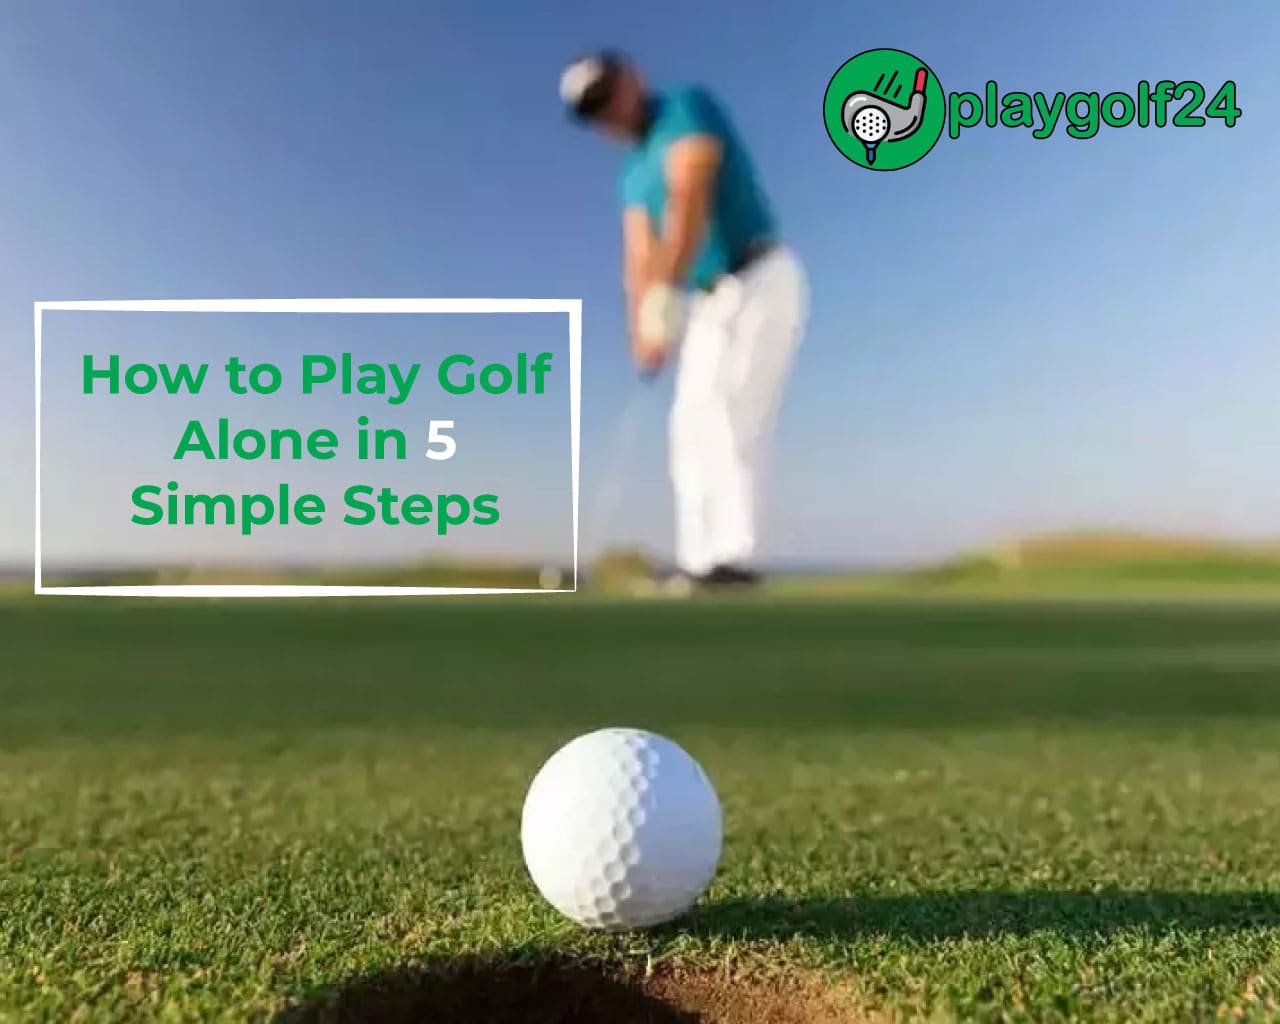 How to Play Golf Alone in 5 Simple Steps